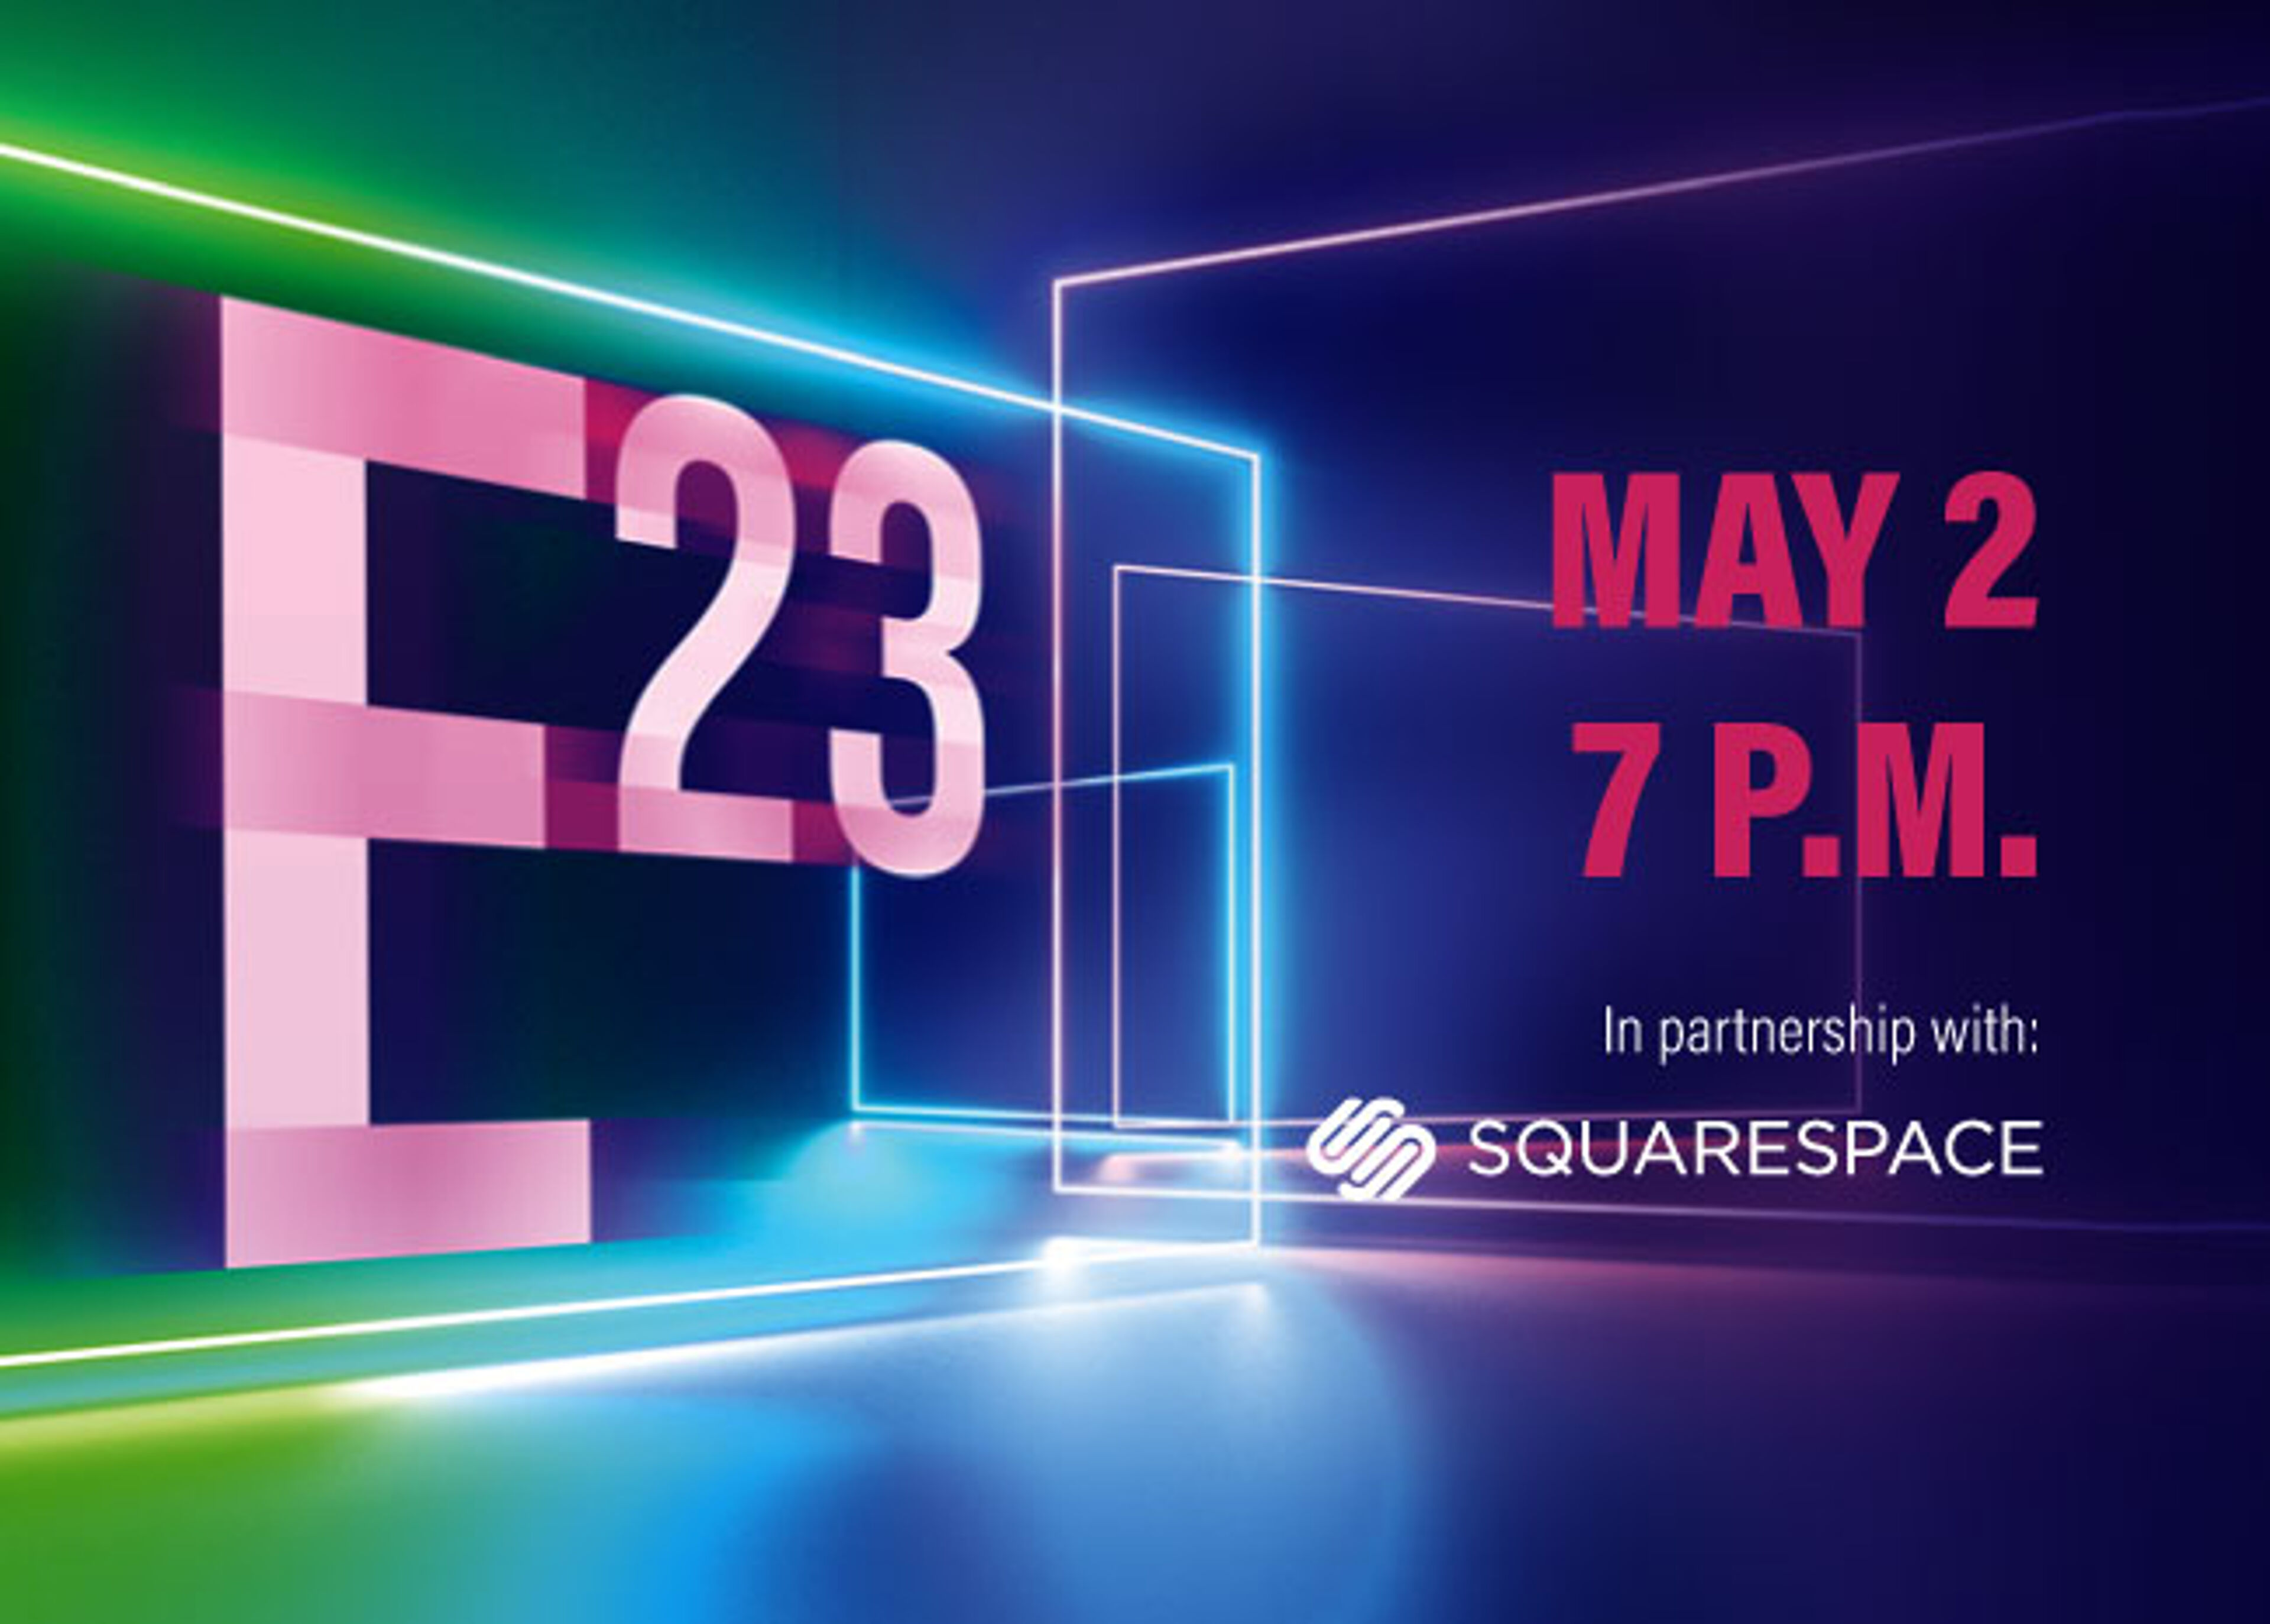 Abstract neon-lit graphic featuring "23" and "MAY 2 7 P.M." with the Squarespace logo, indicating an event partnership.